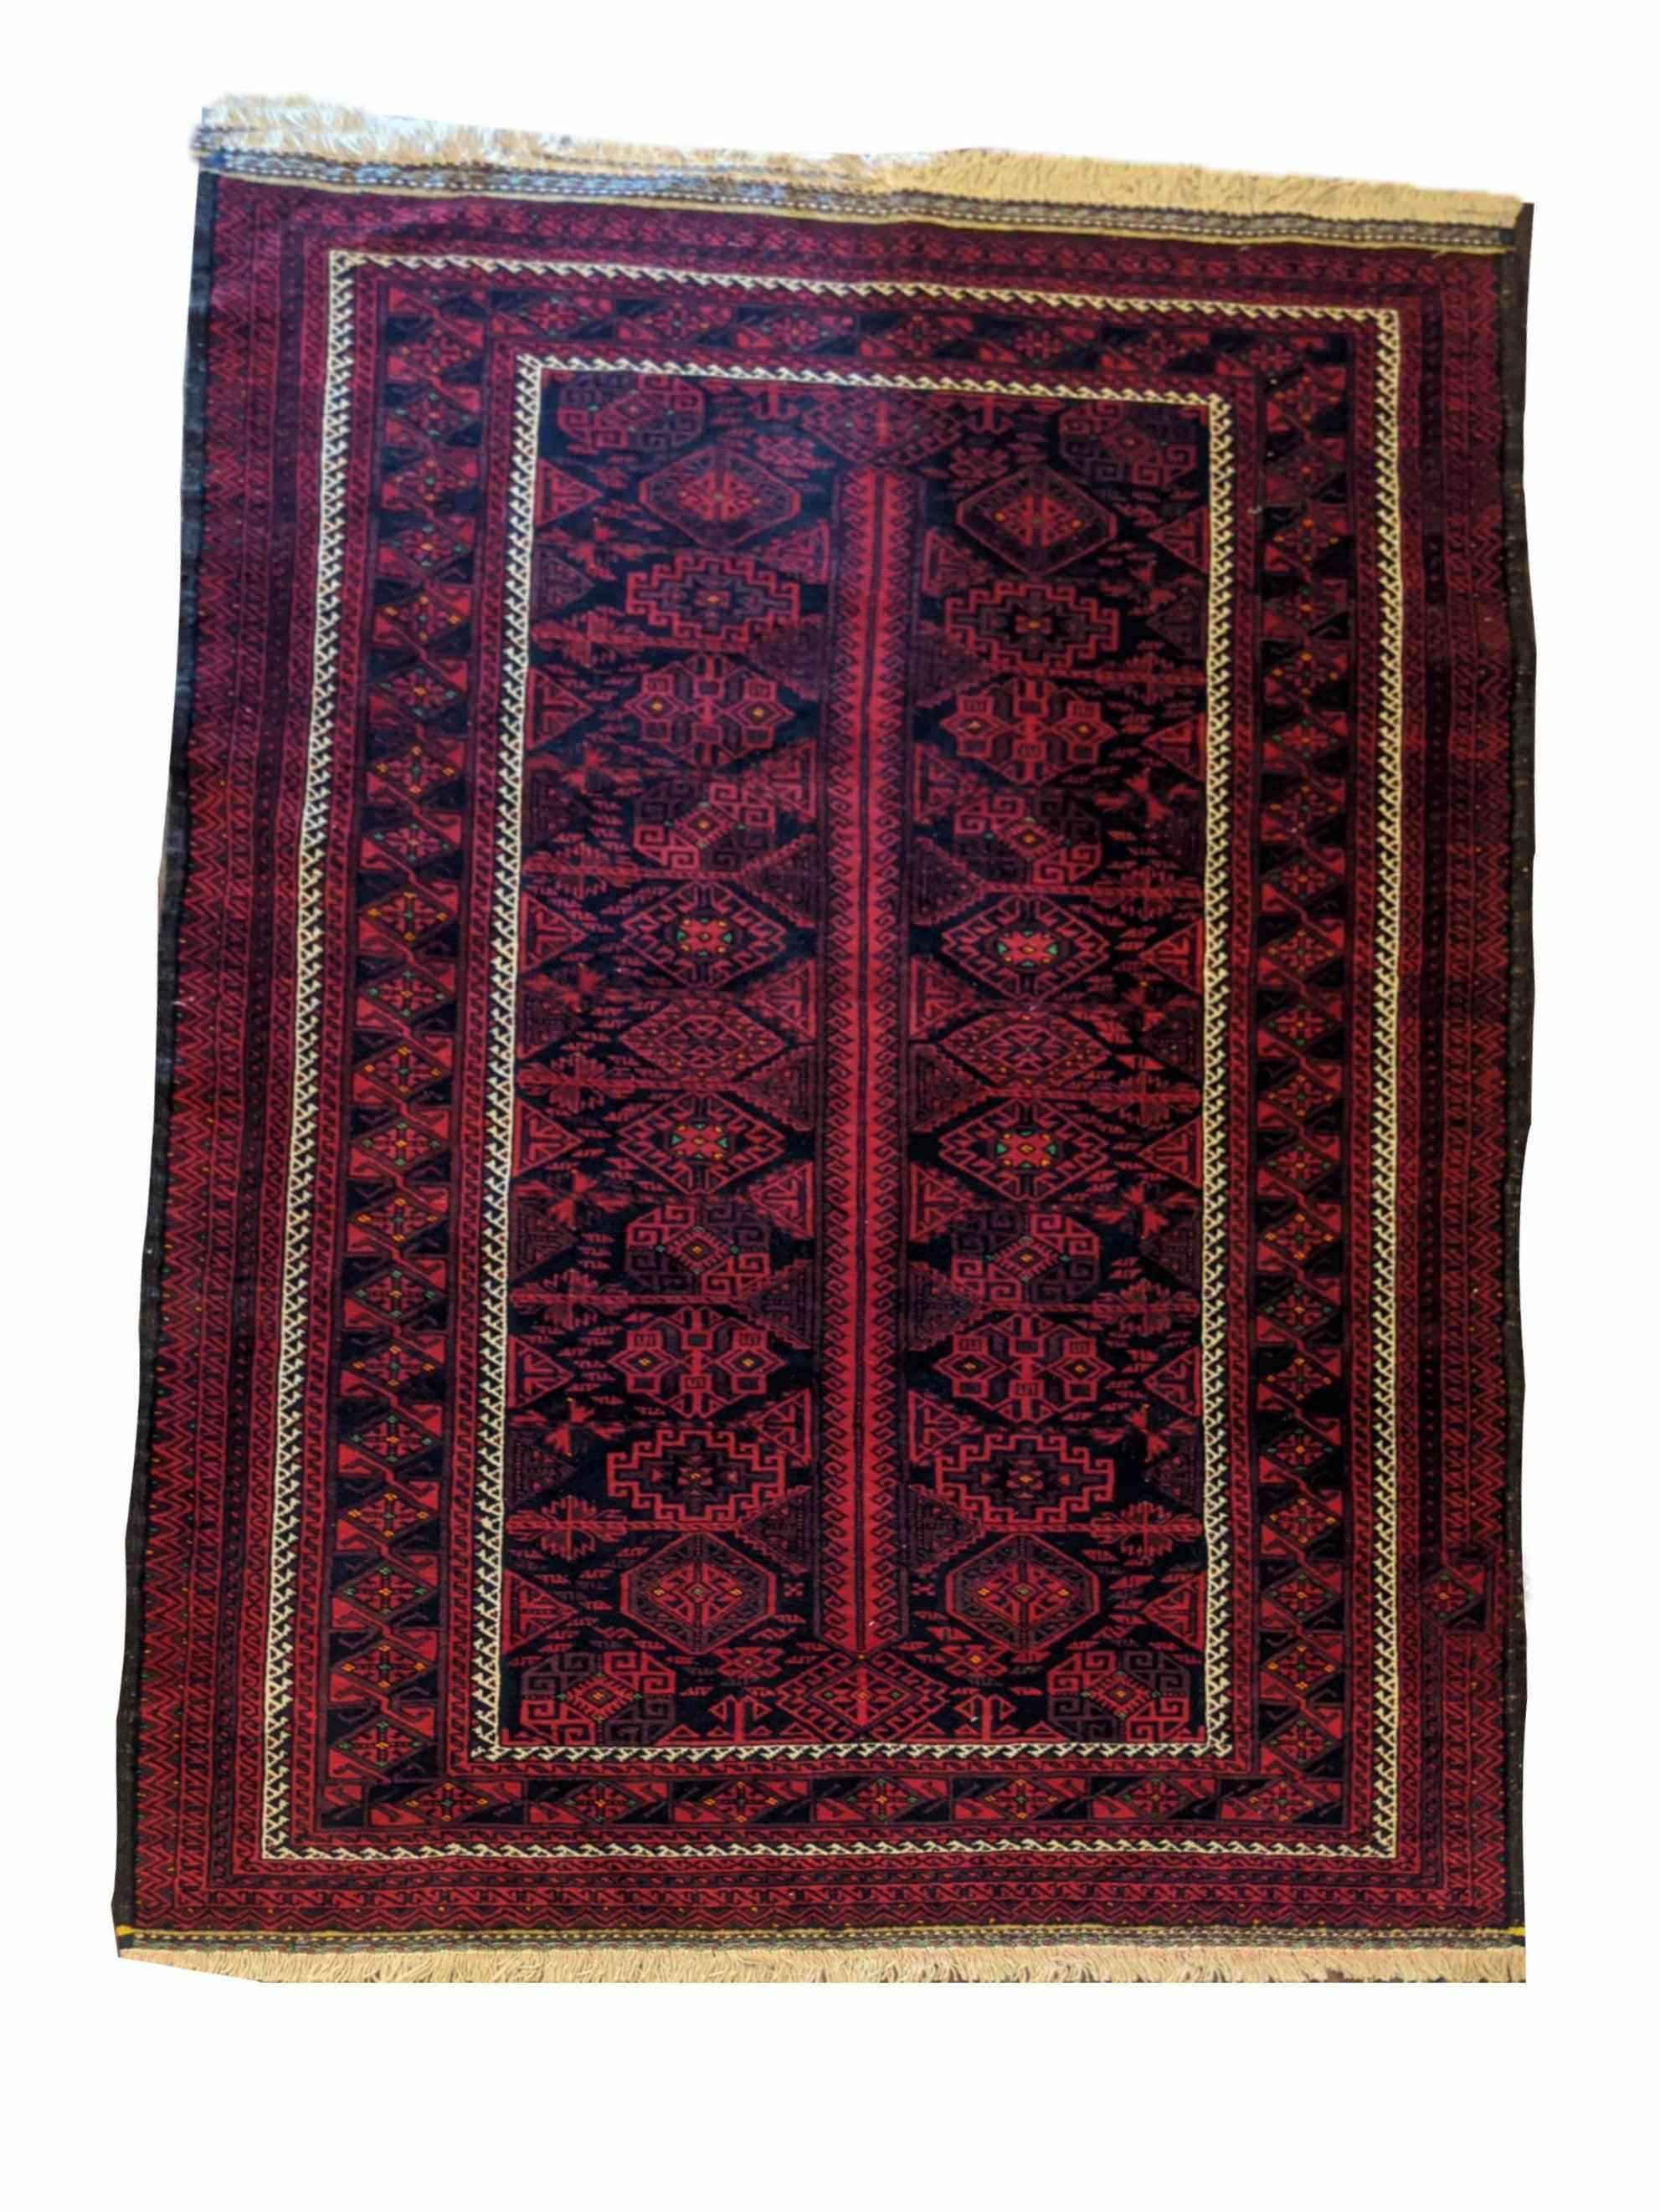 196 x 136 cm Fine Persian Red Baluch Geometric Red Rug - Rugmaster